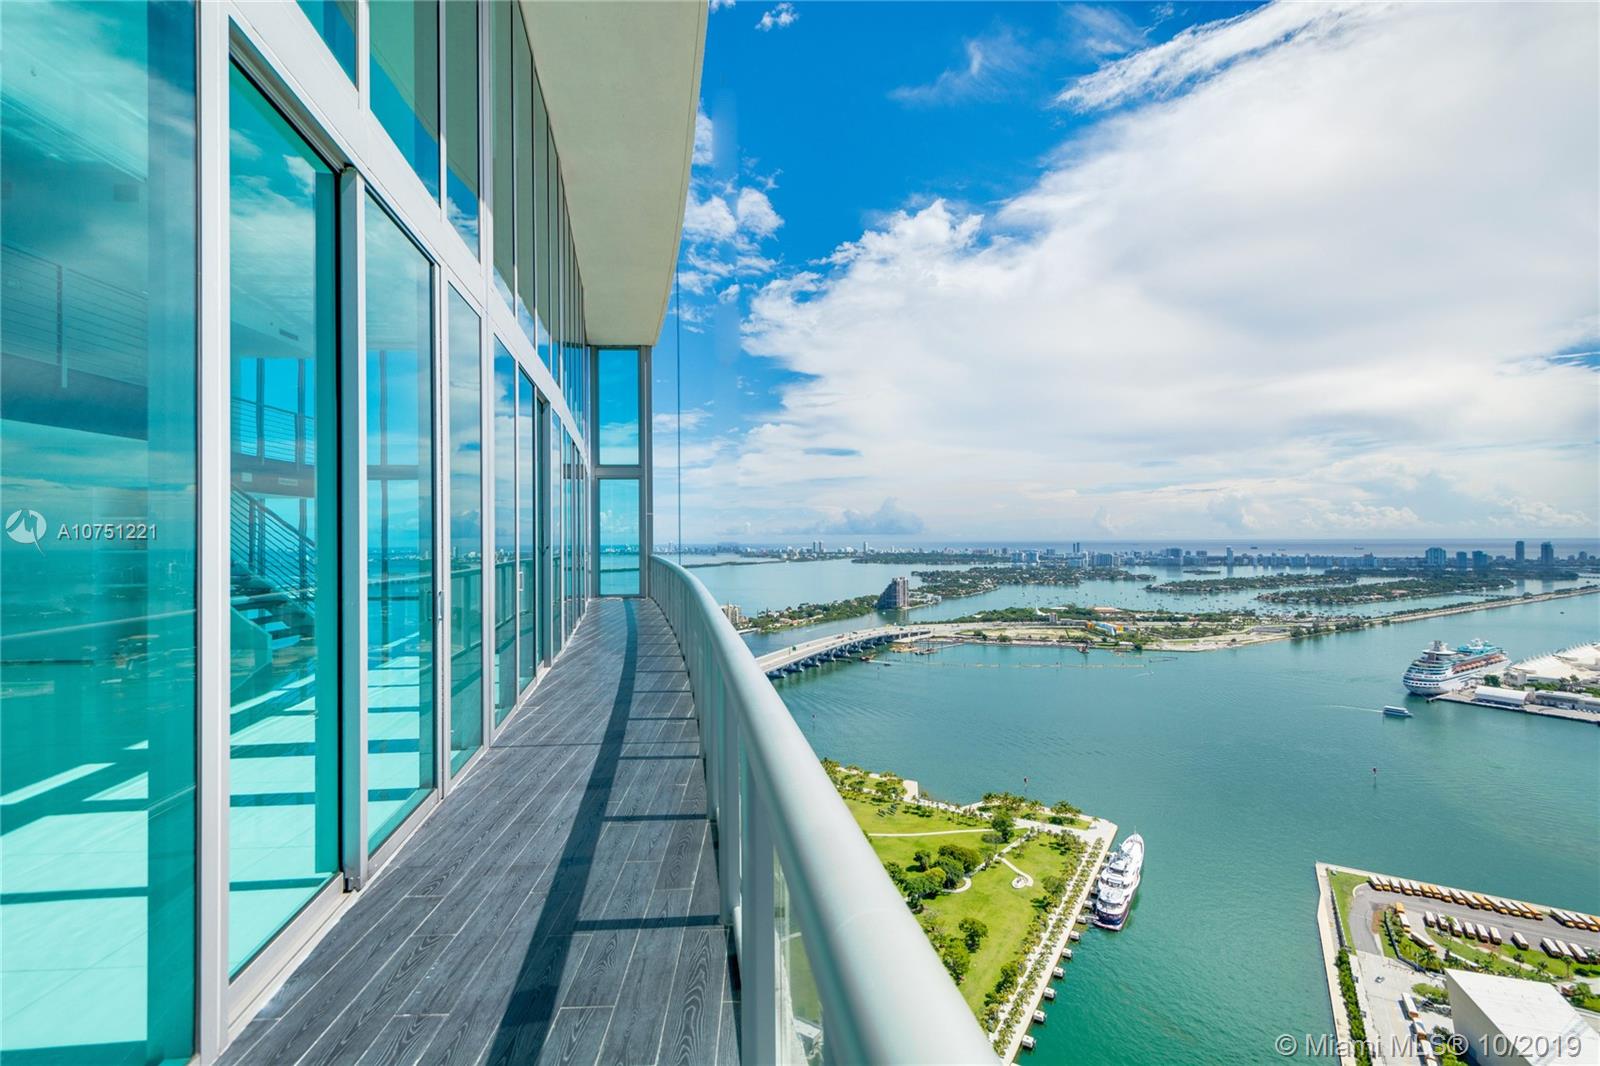 a view of a balcony with lake